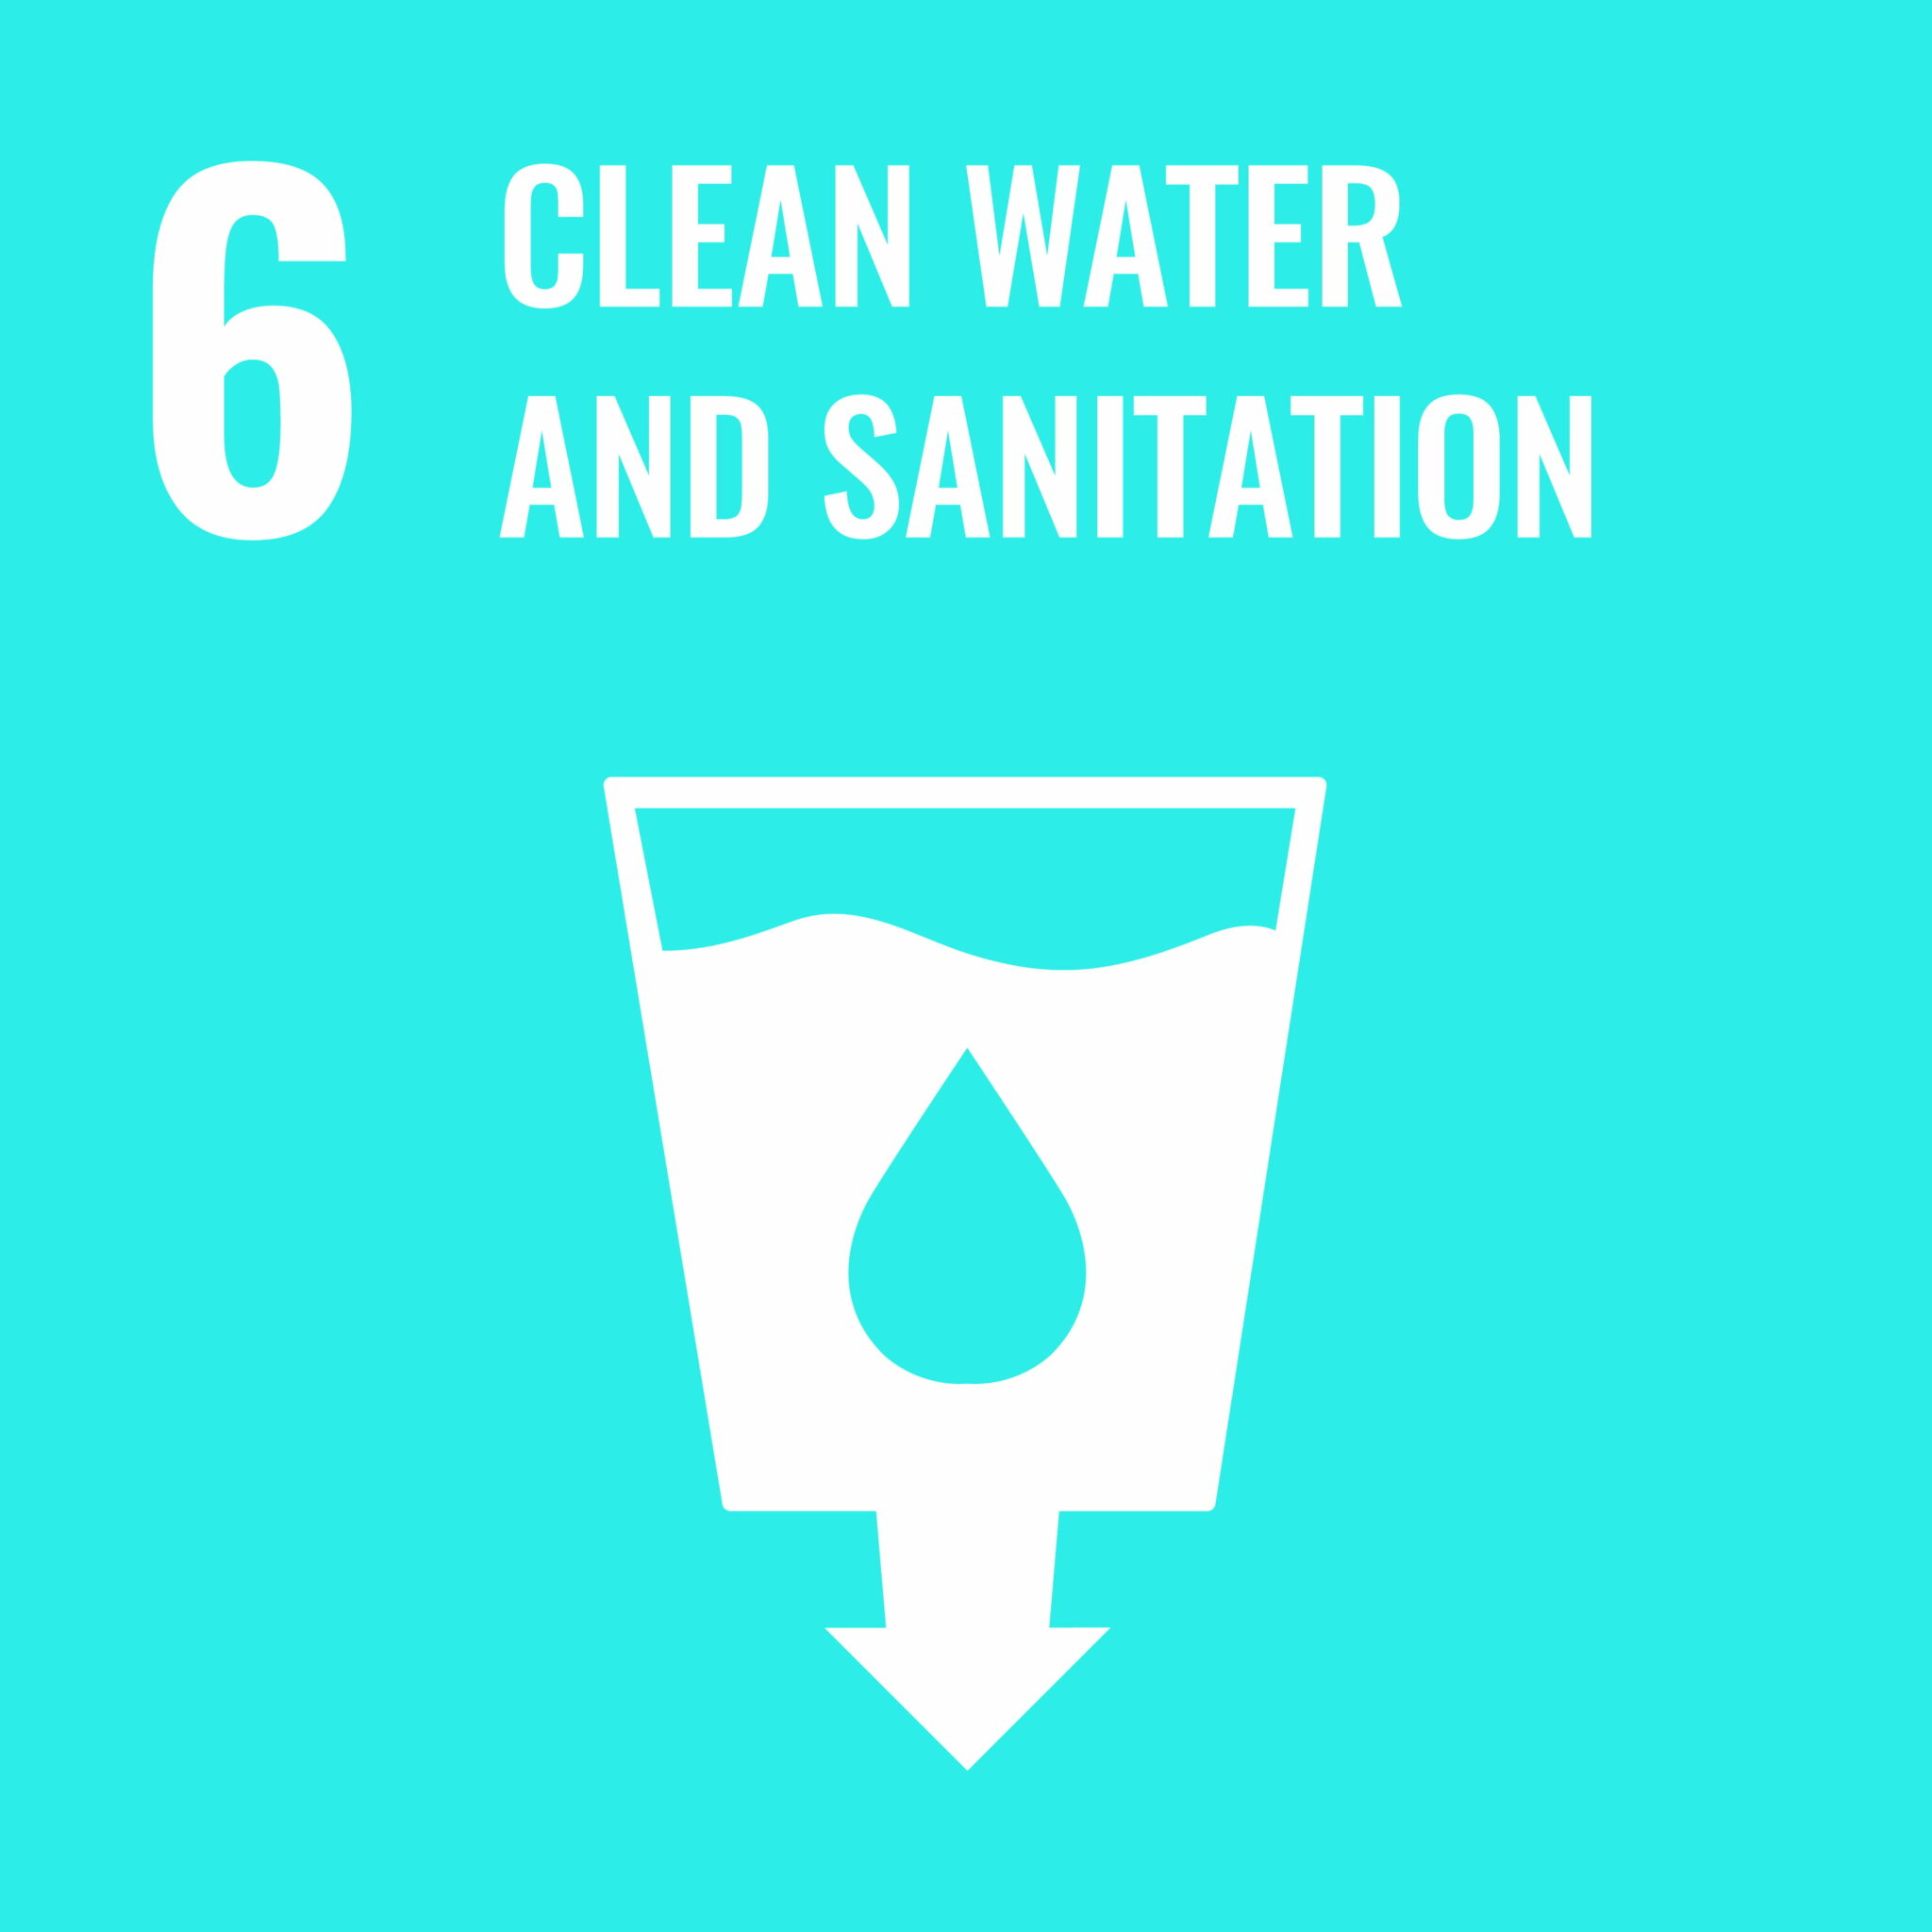 6-Clean Water and Sanitation